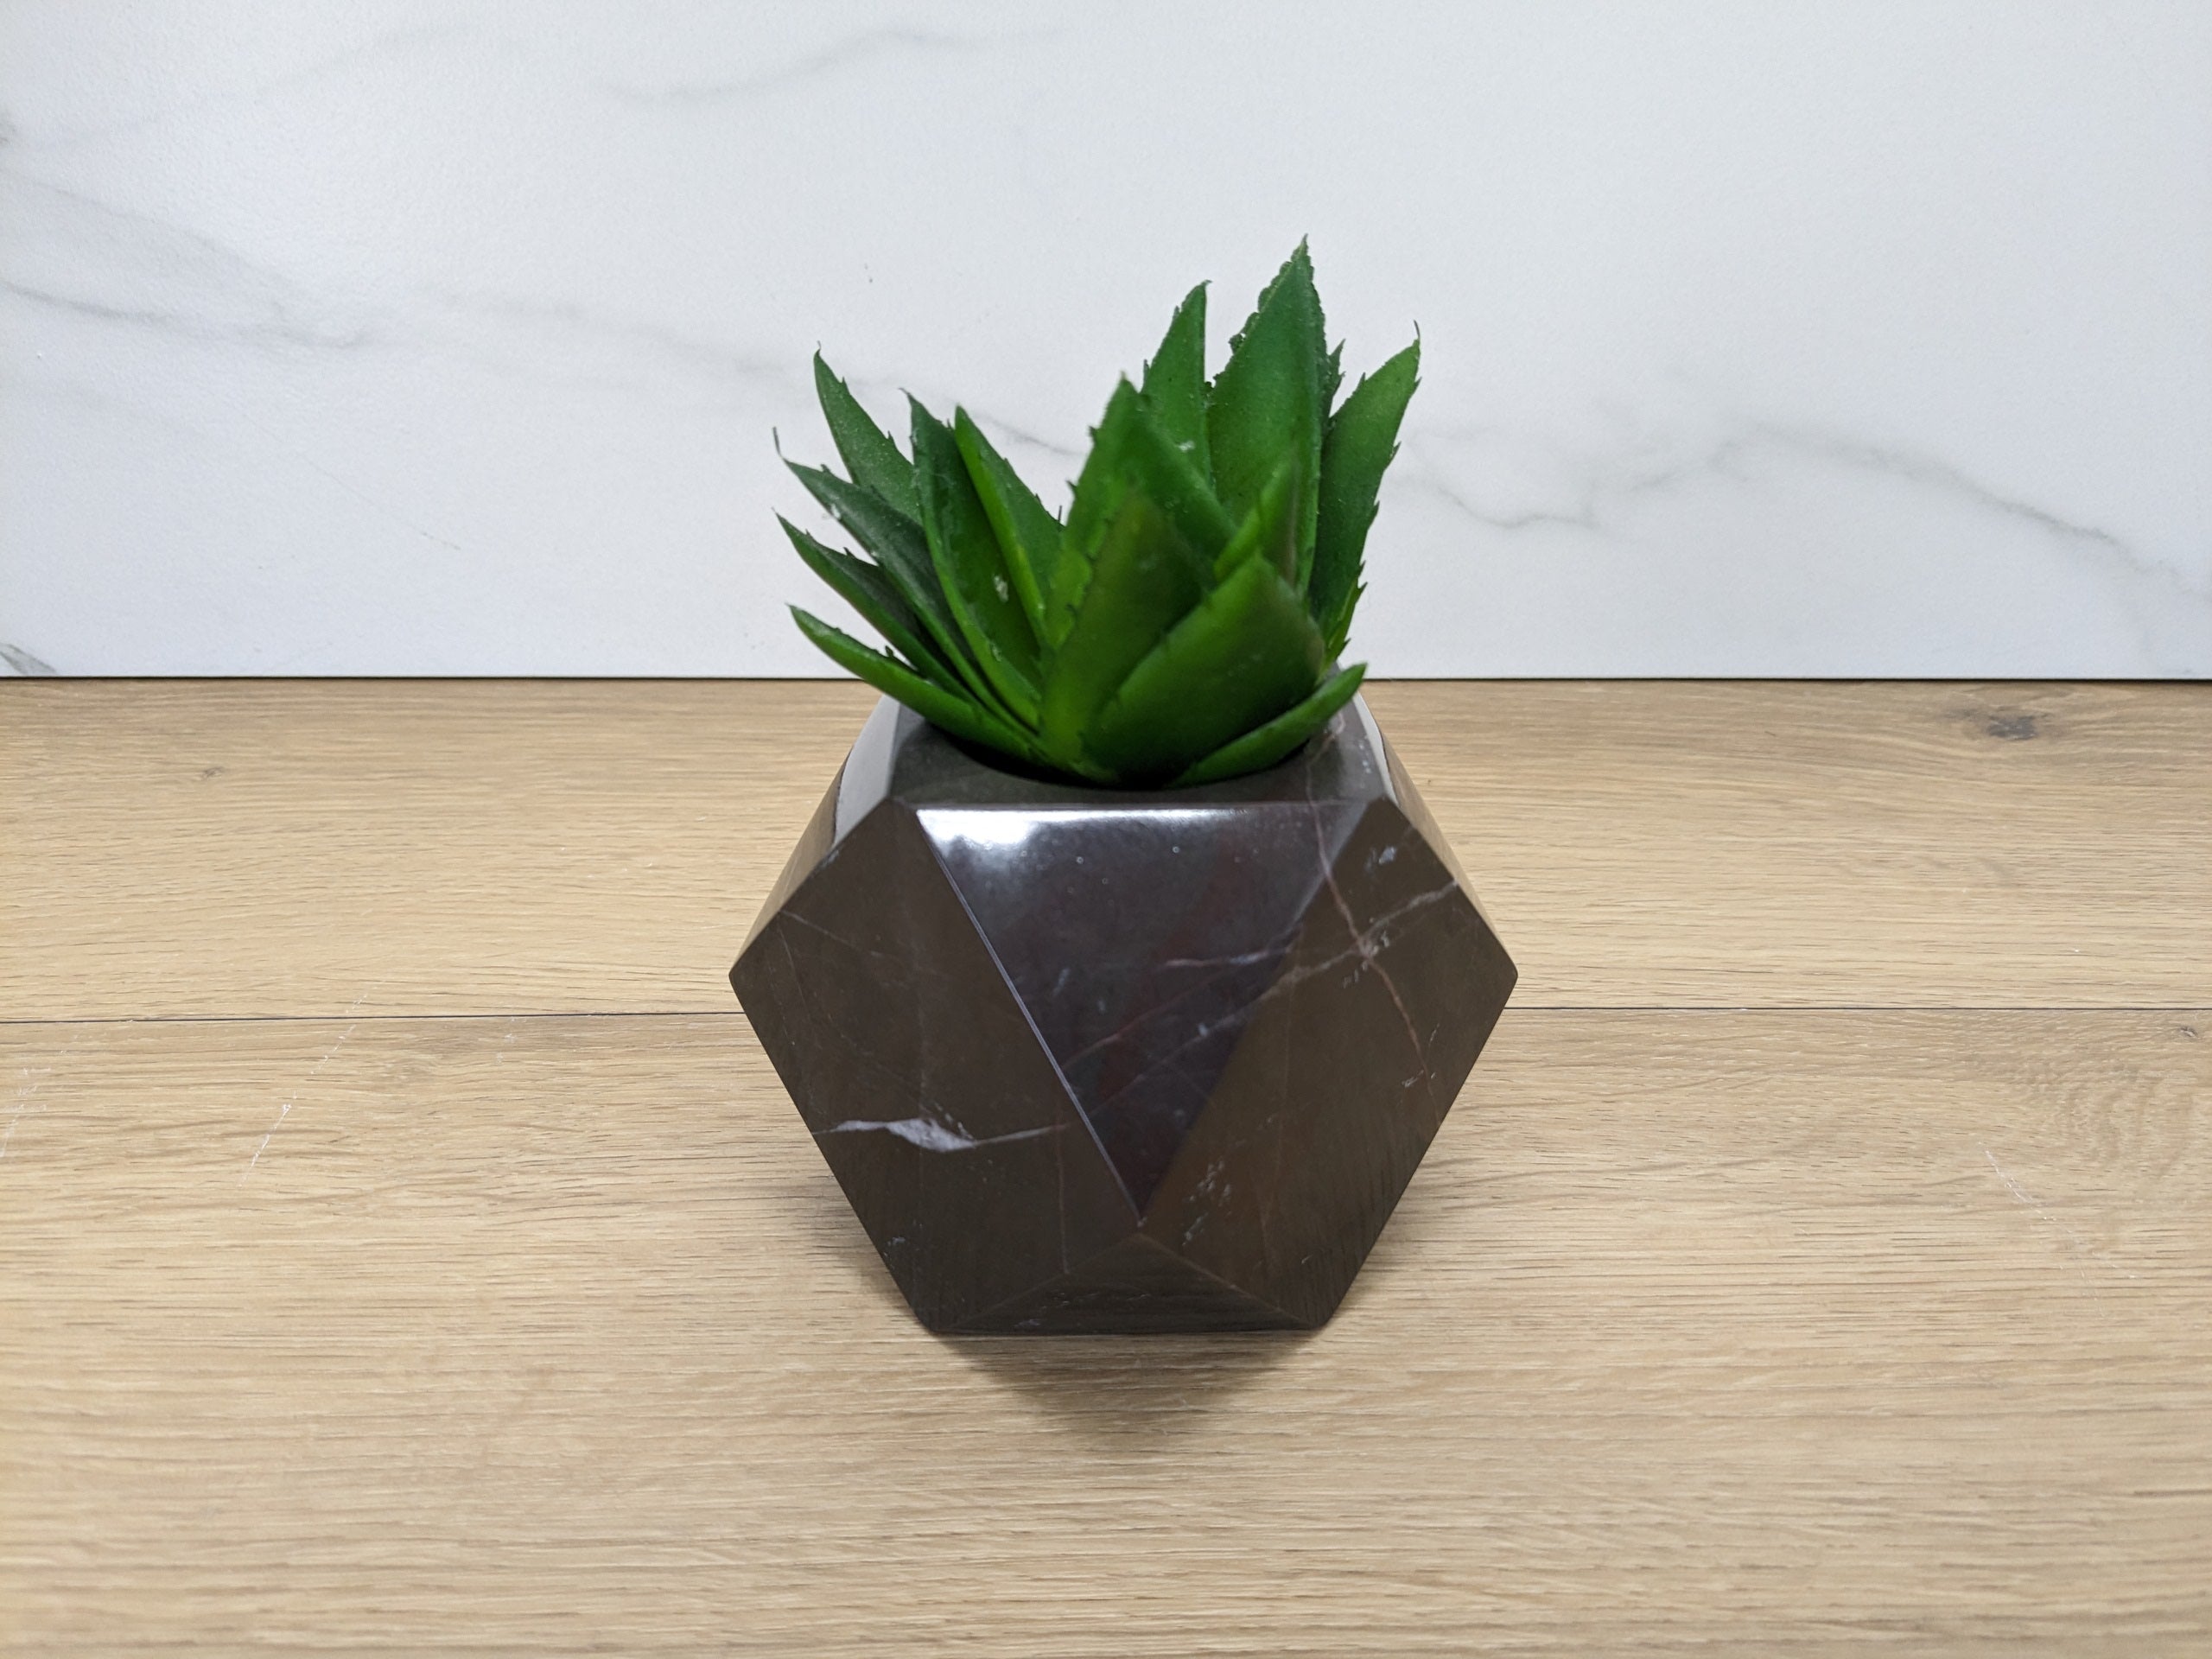 Black Onyx Stone Mini Planter. One of a kind. Handcarved in Mexico. We package and ship from the USA. Buy now at www.felipeandgrace.com.